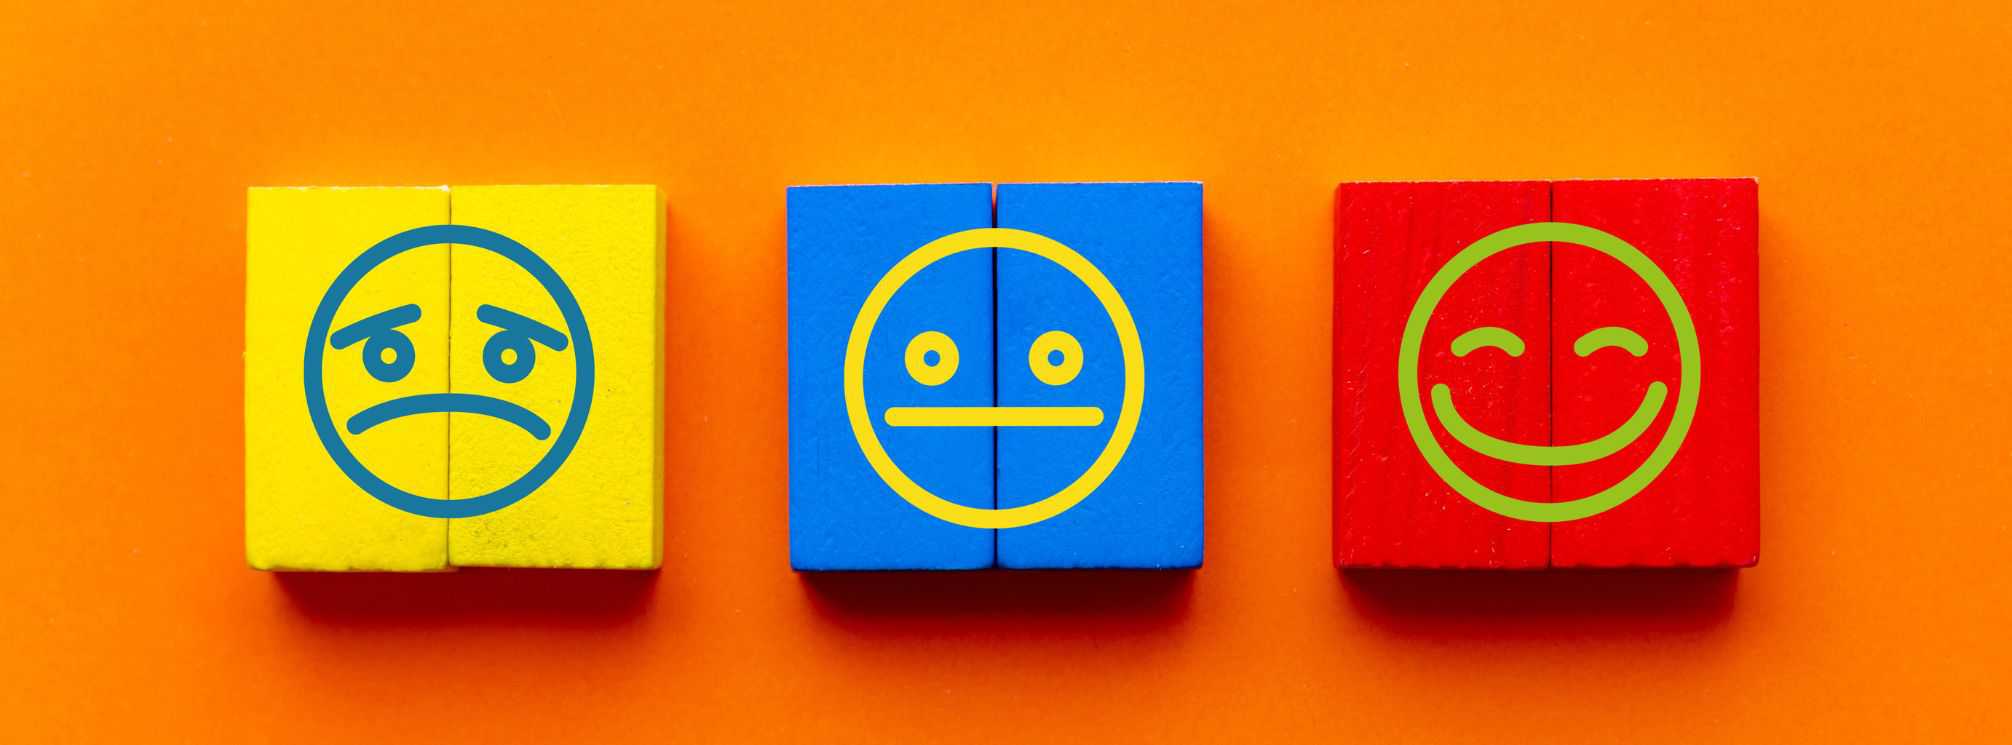 Vibrant orange background with three wooden blocks on it. One is yellow with a frowning face drawn on it, the middle block is blue with a neutral facial expression, and the last is red with a smiley face on it.